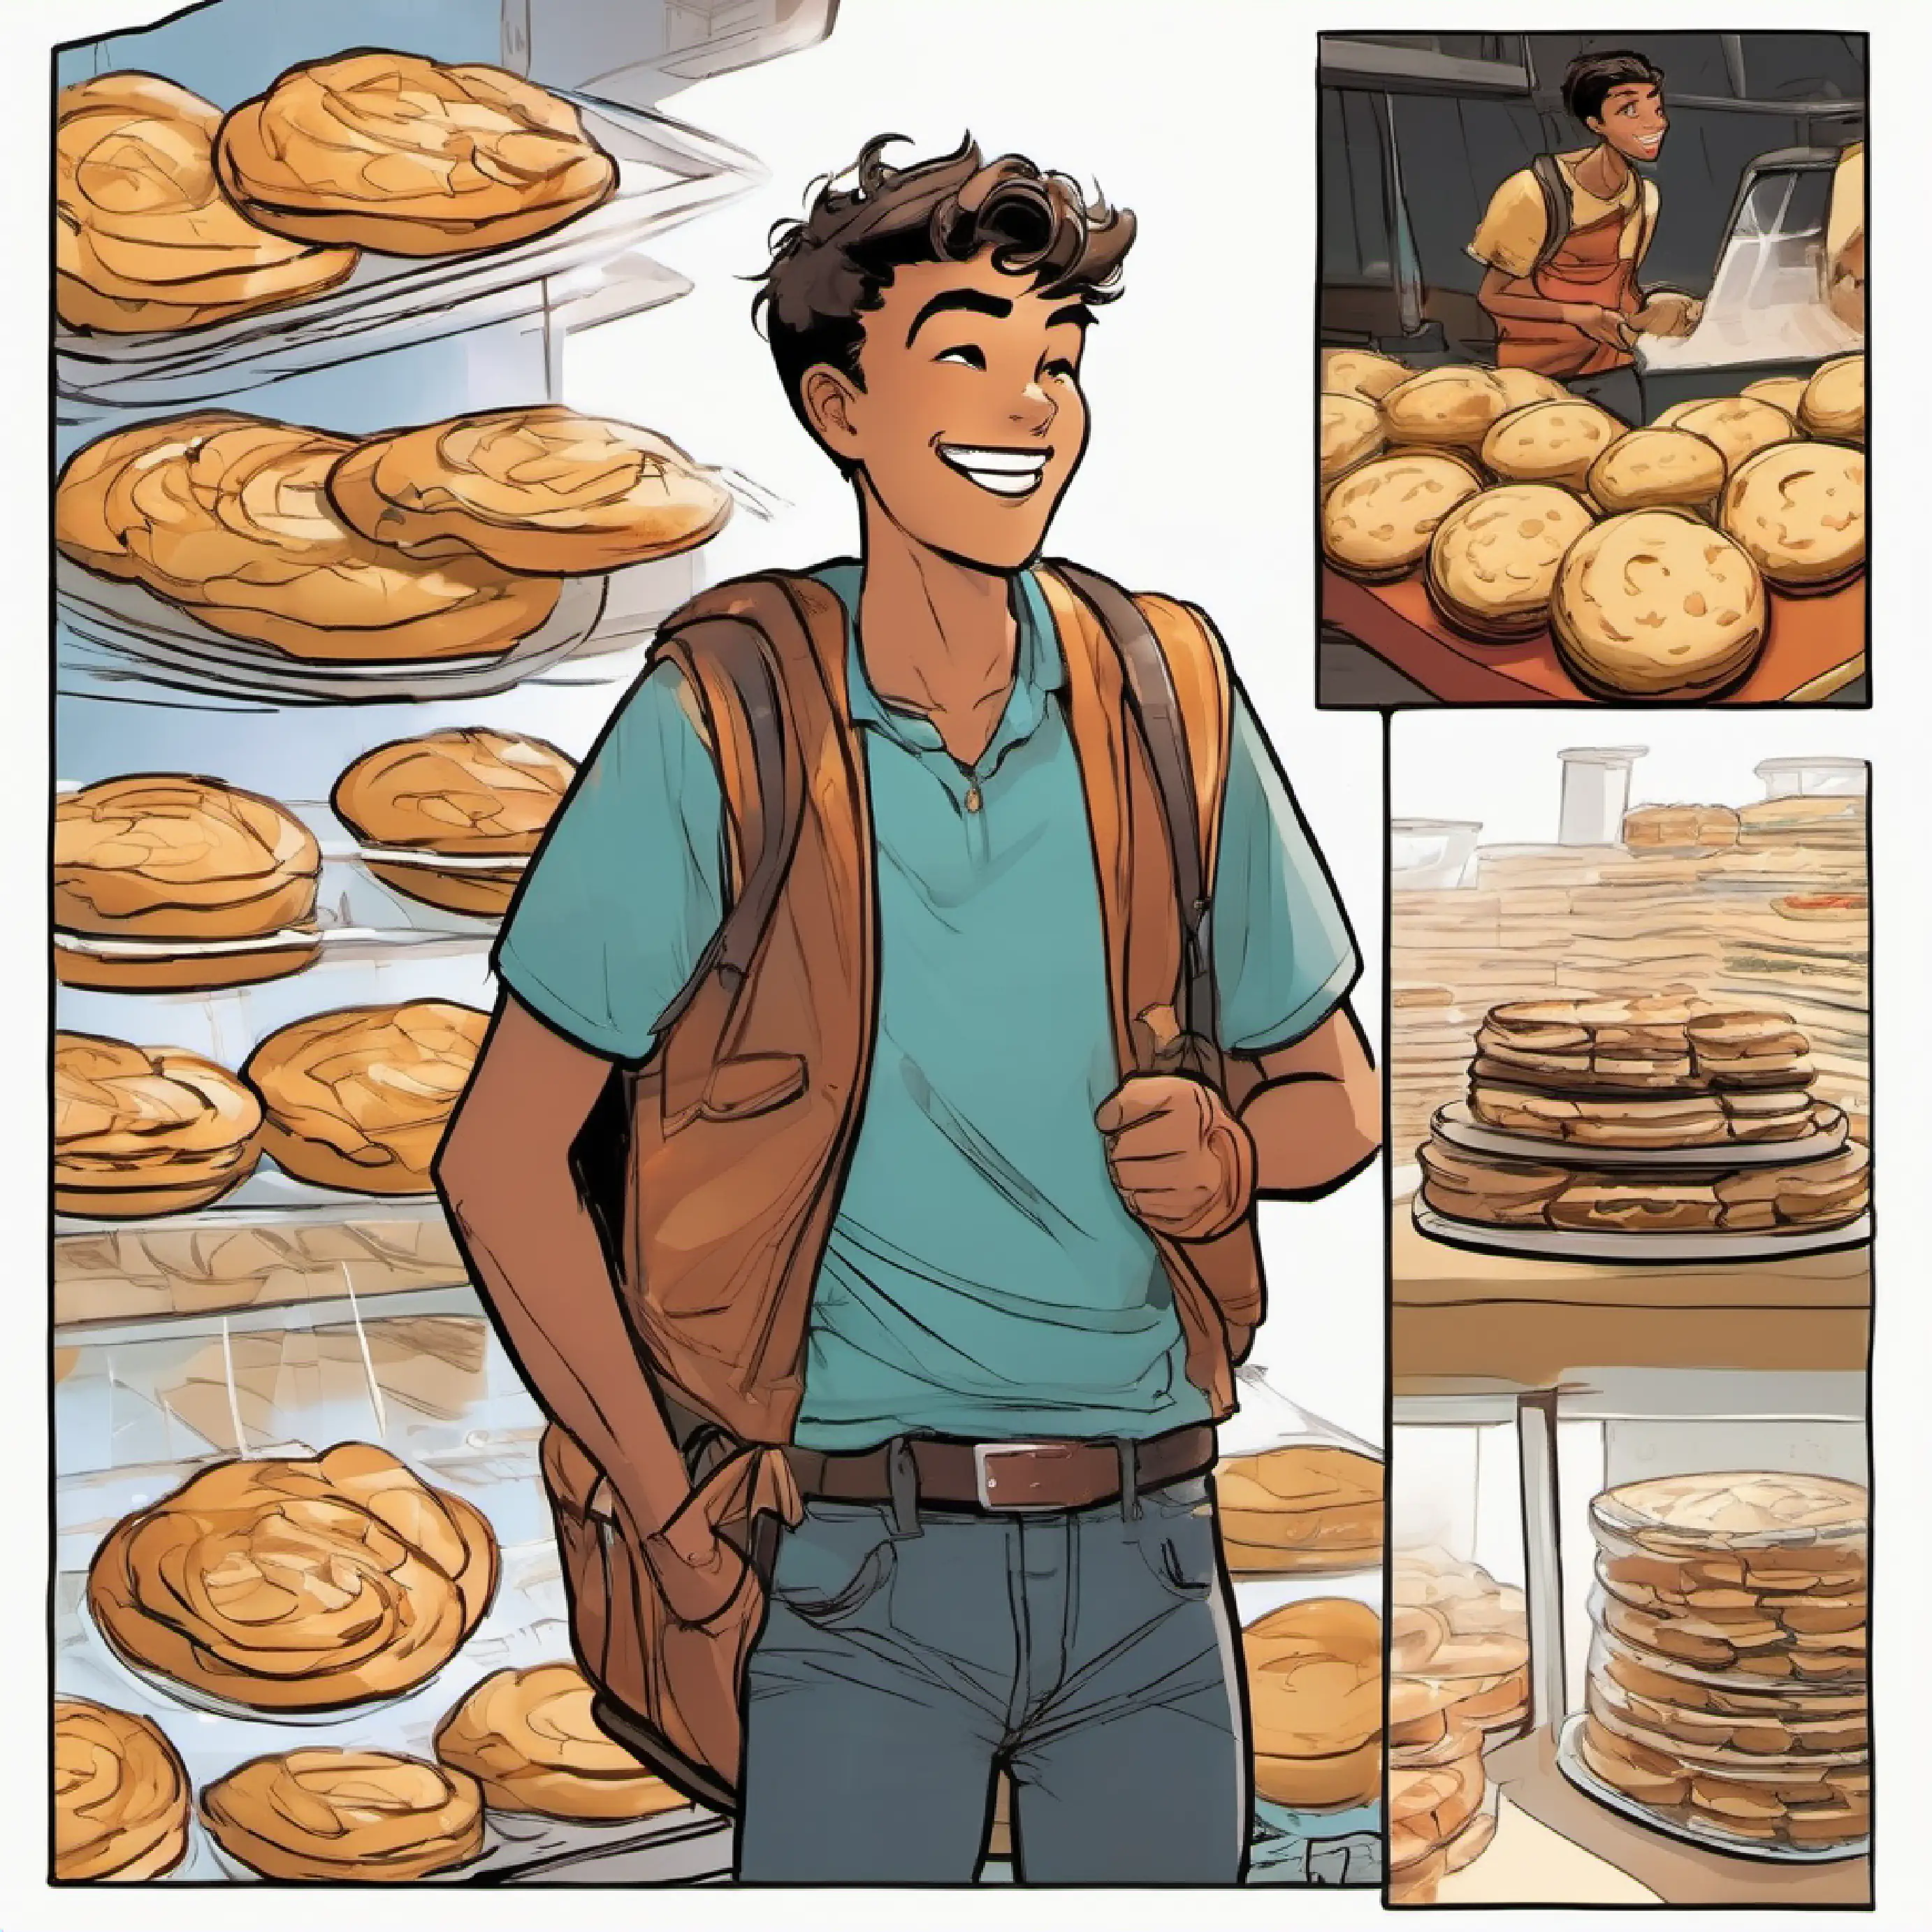 Kevin visits the bakery and eats all the cookies.